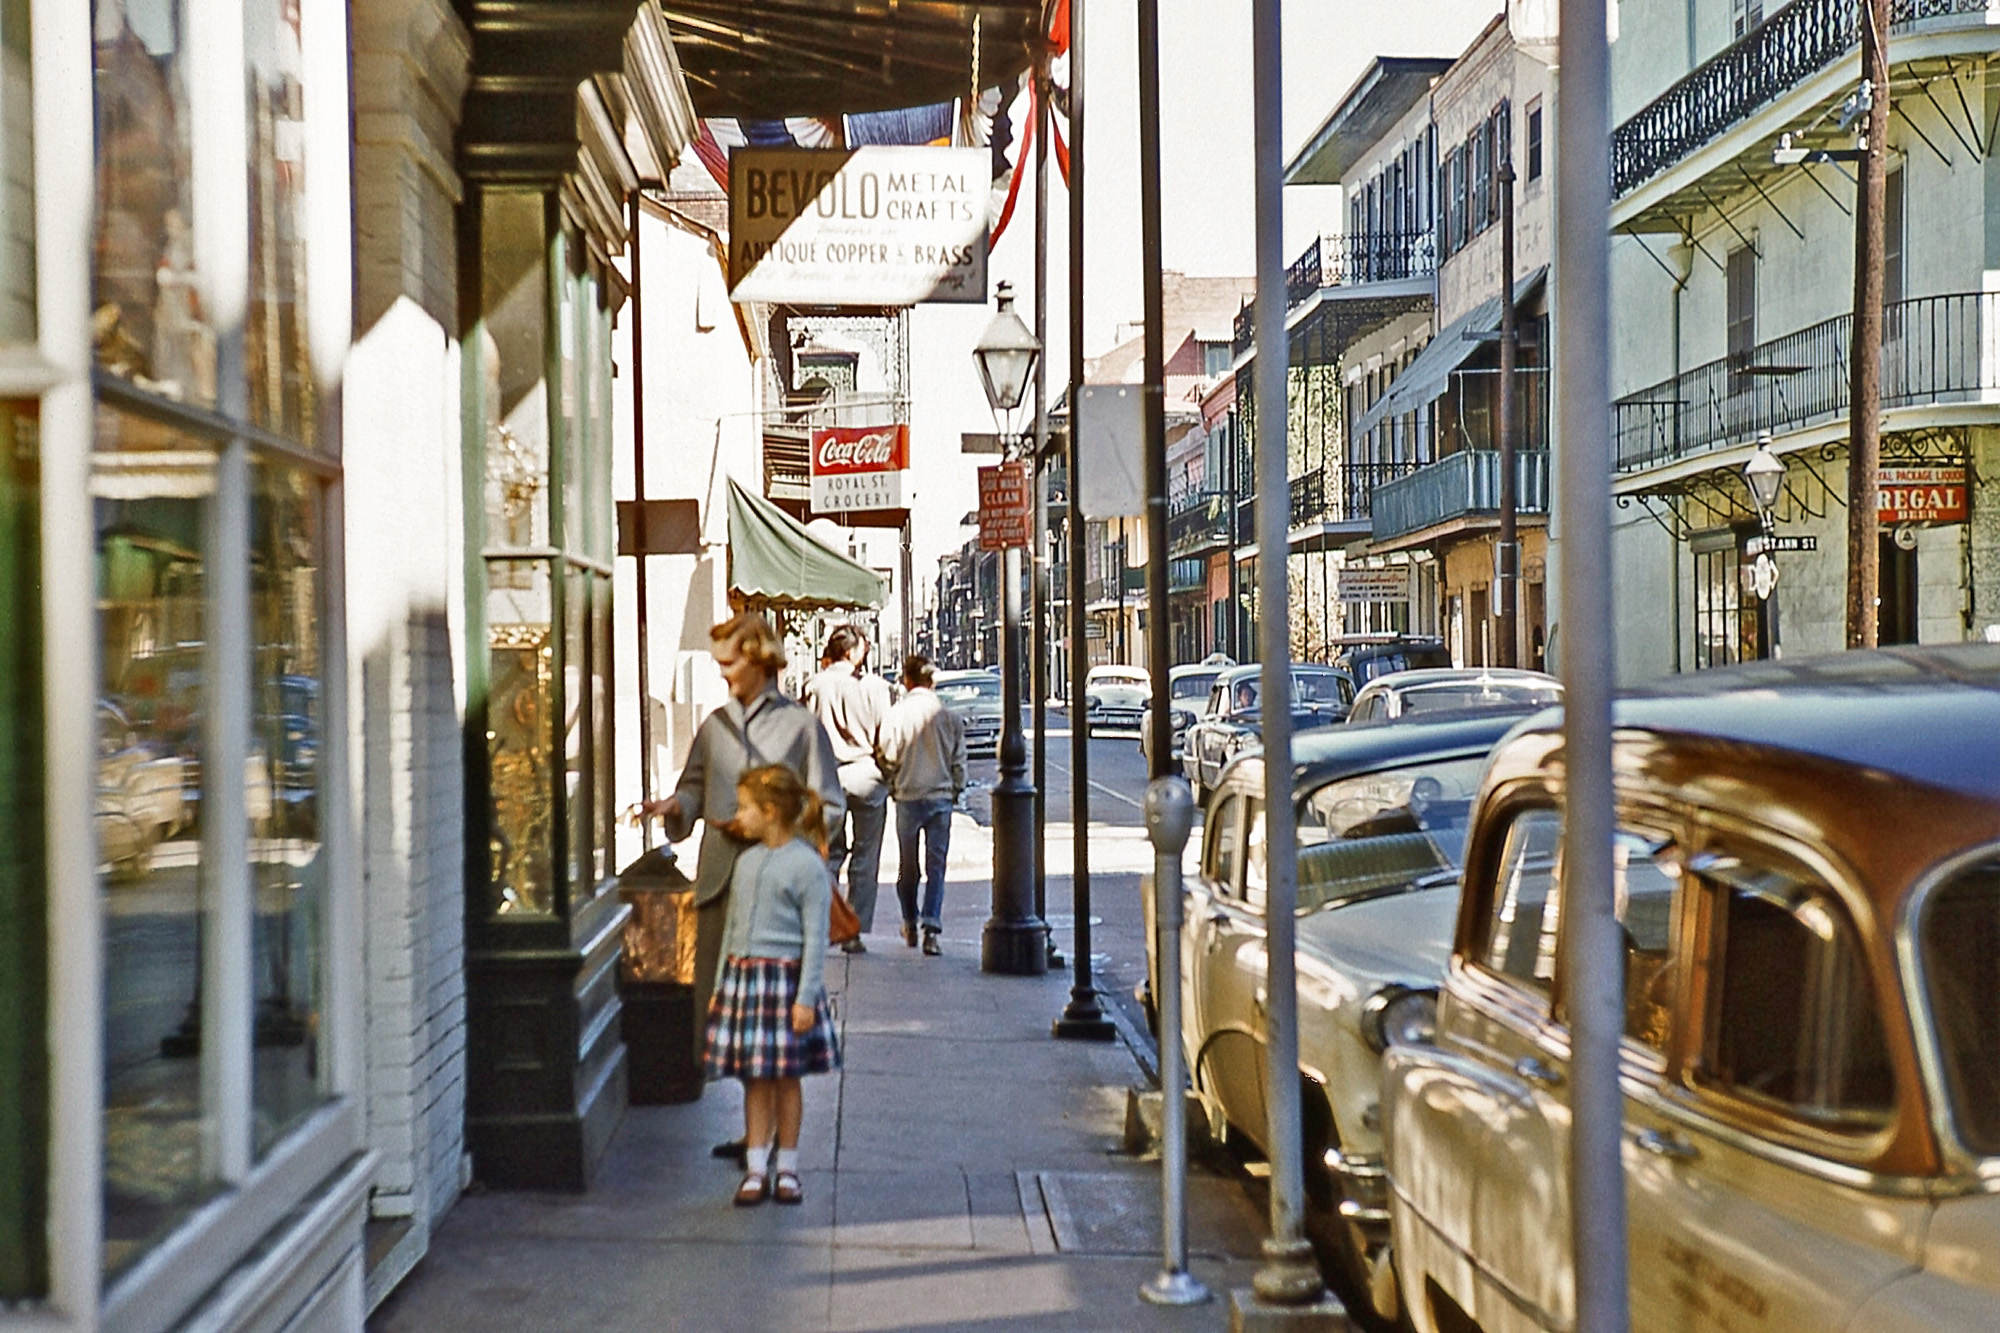 Kodachrome taken by my dad in New Orleans in February 1956. View full size.